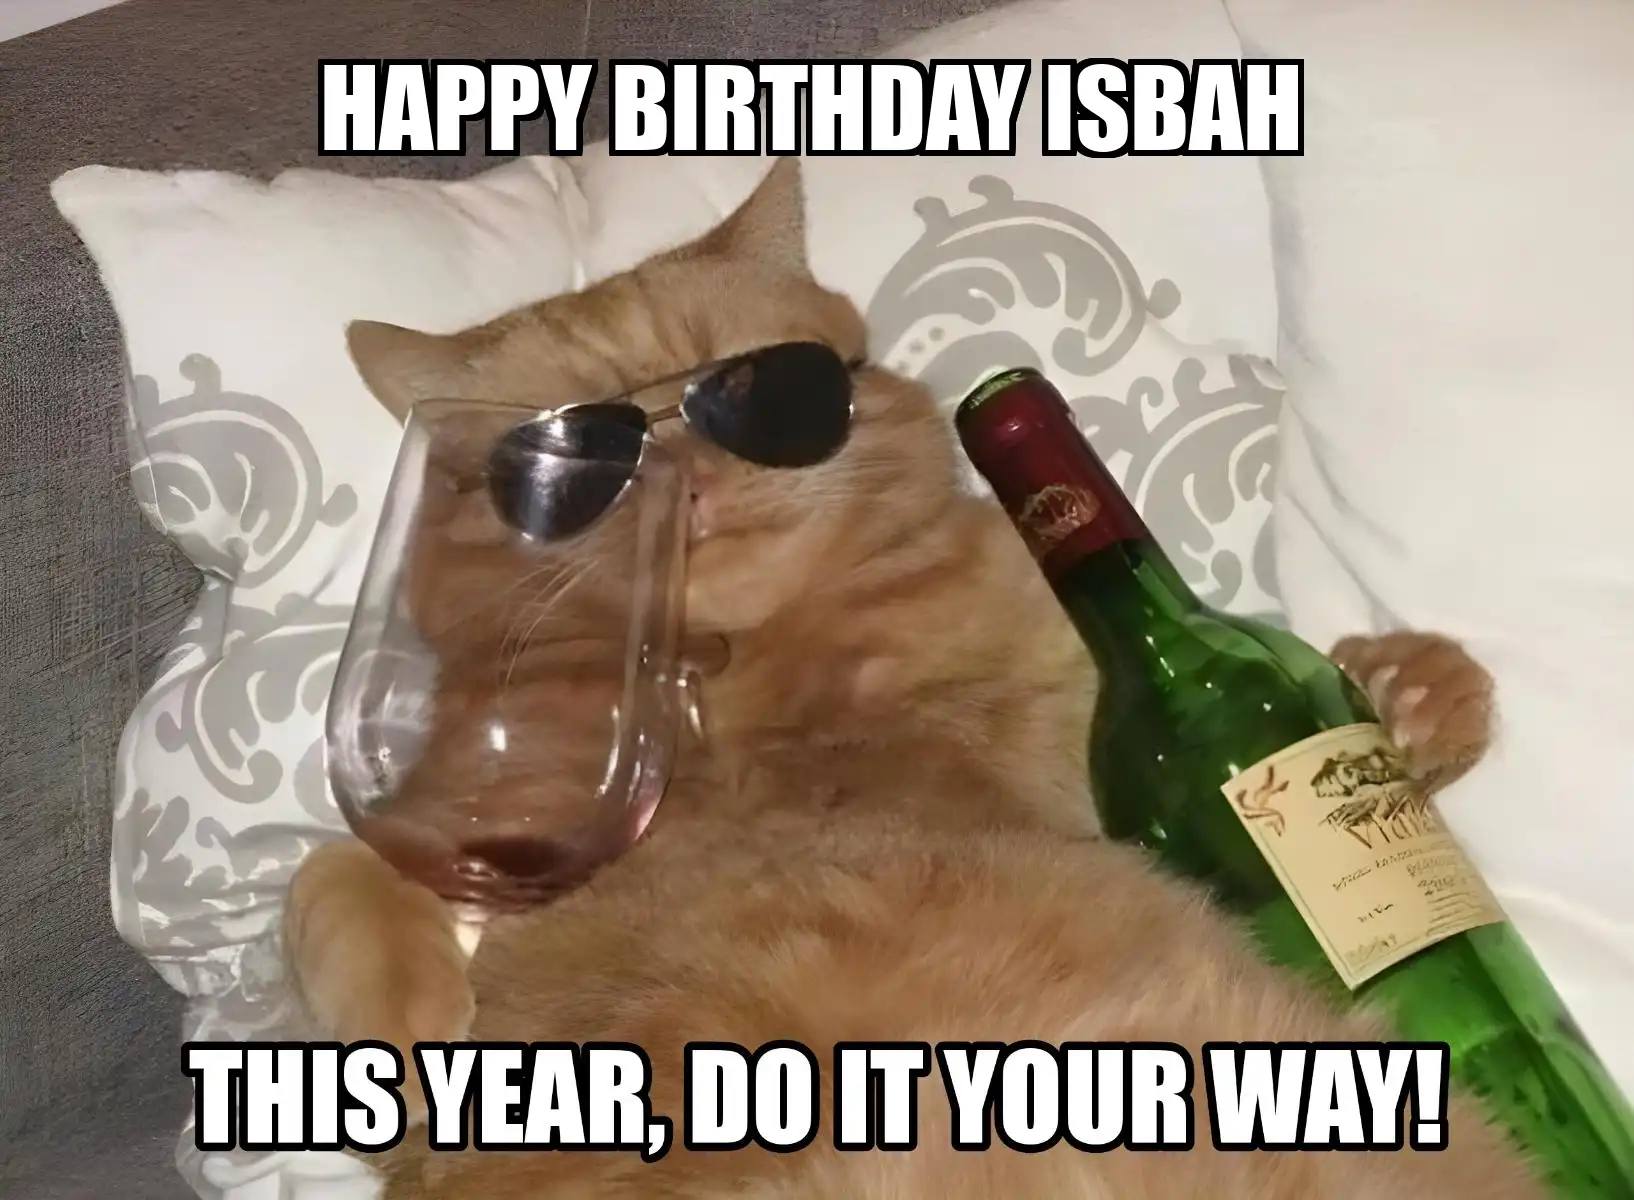 Happy Birthday Isbah This Year Do It Your Way Meme